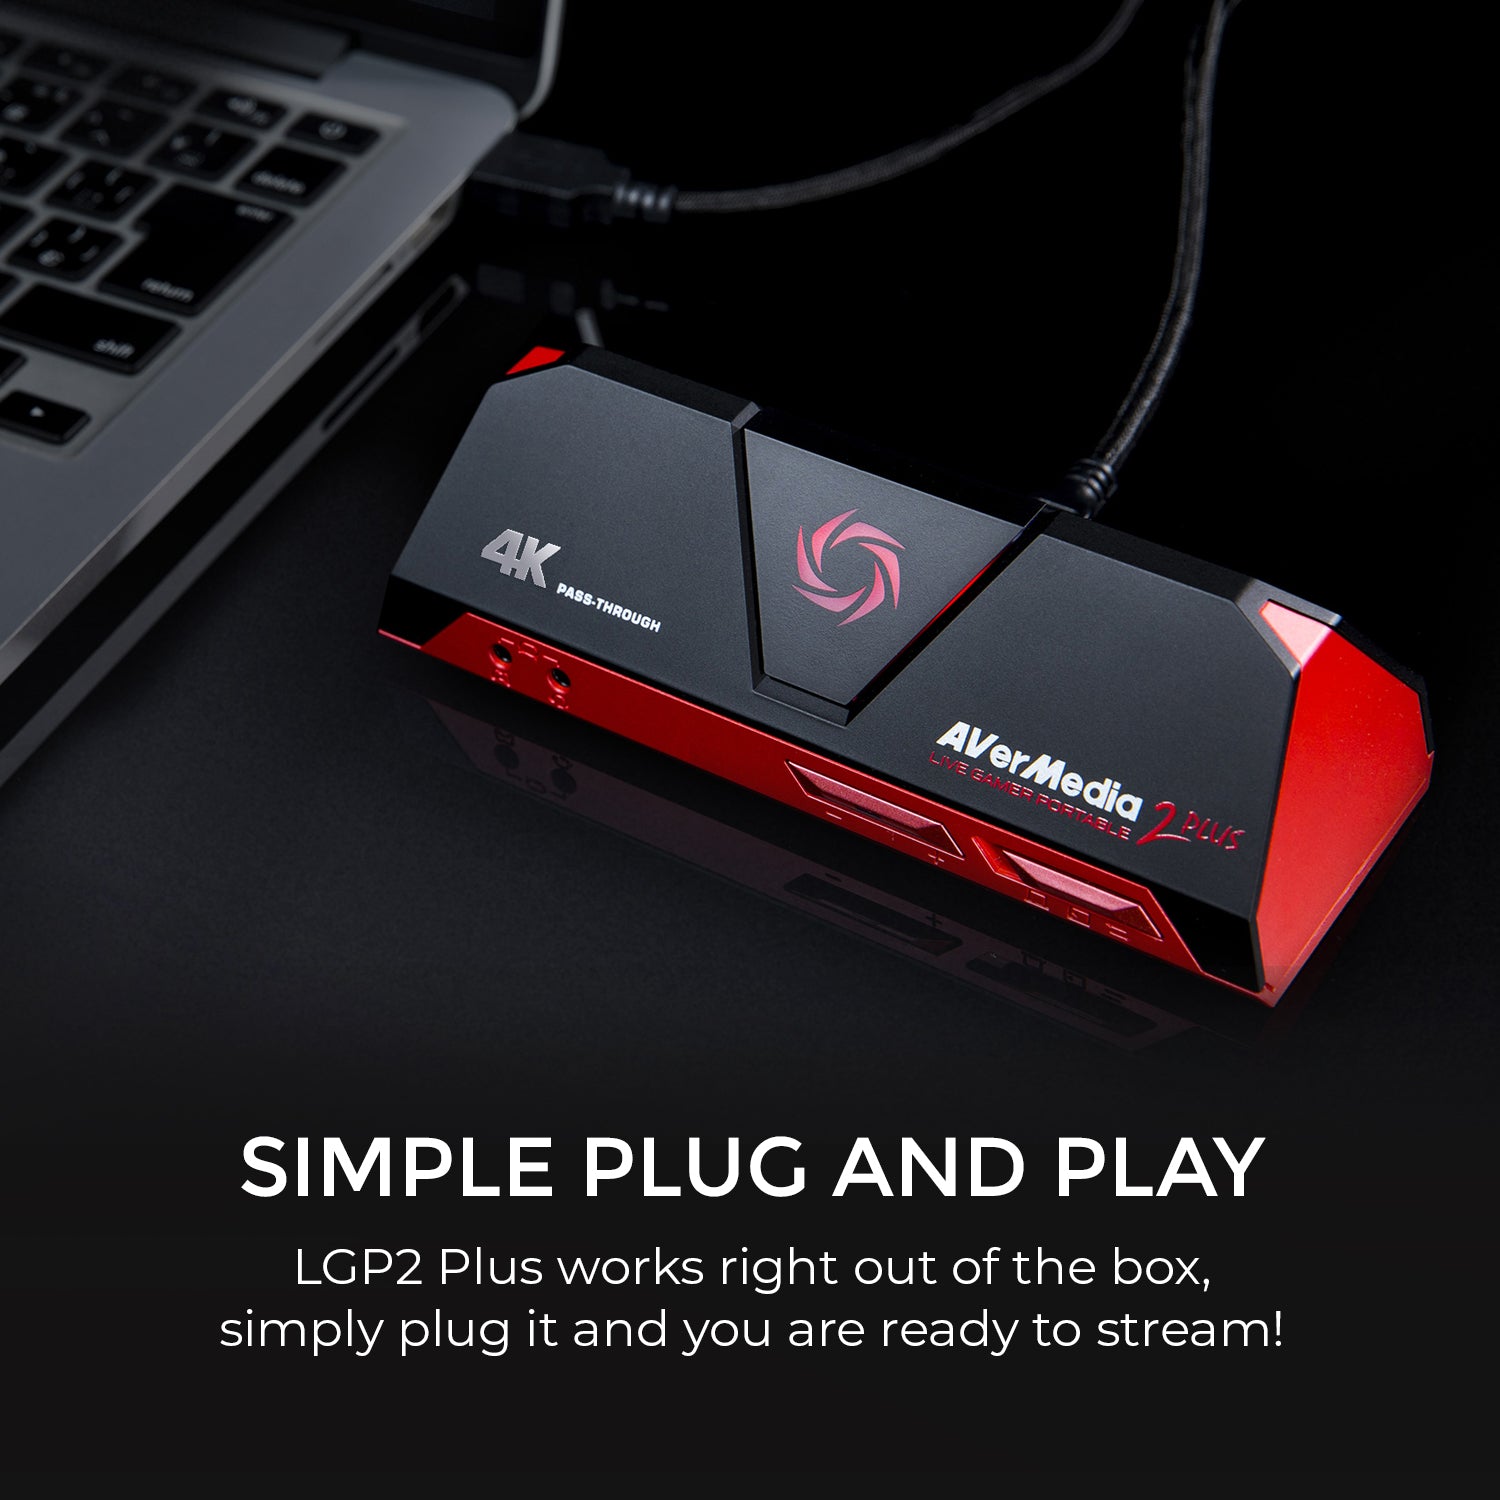 AVerMedia Live Gamer Portable 2 Plus capture device has 4K passthrough and  PC-free mode